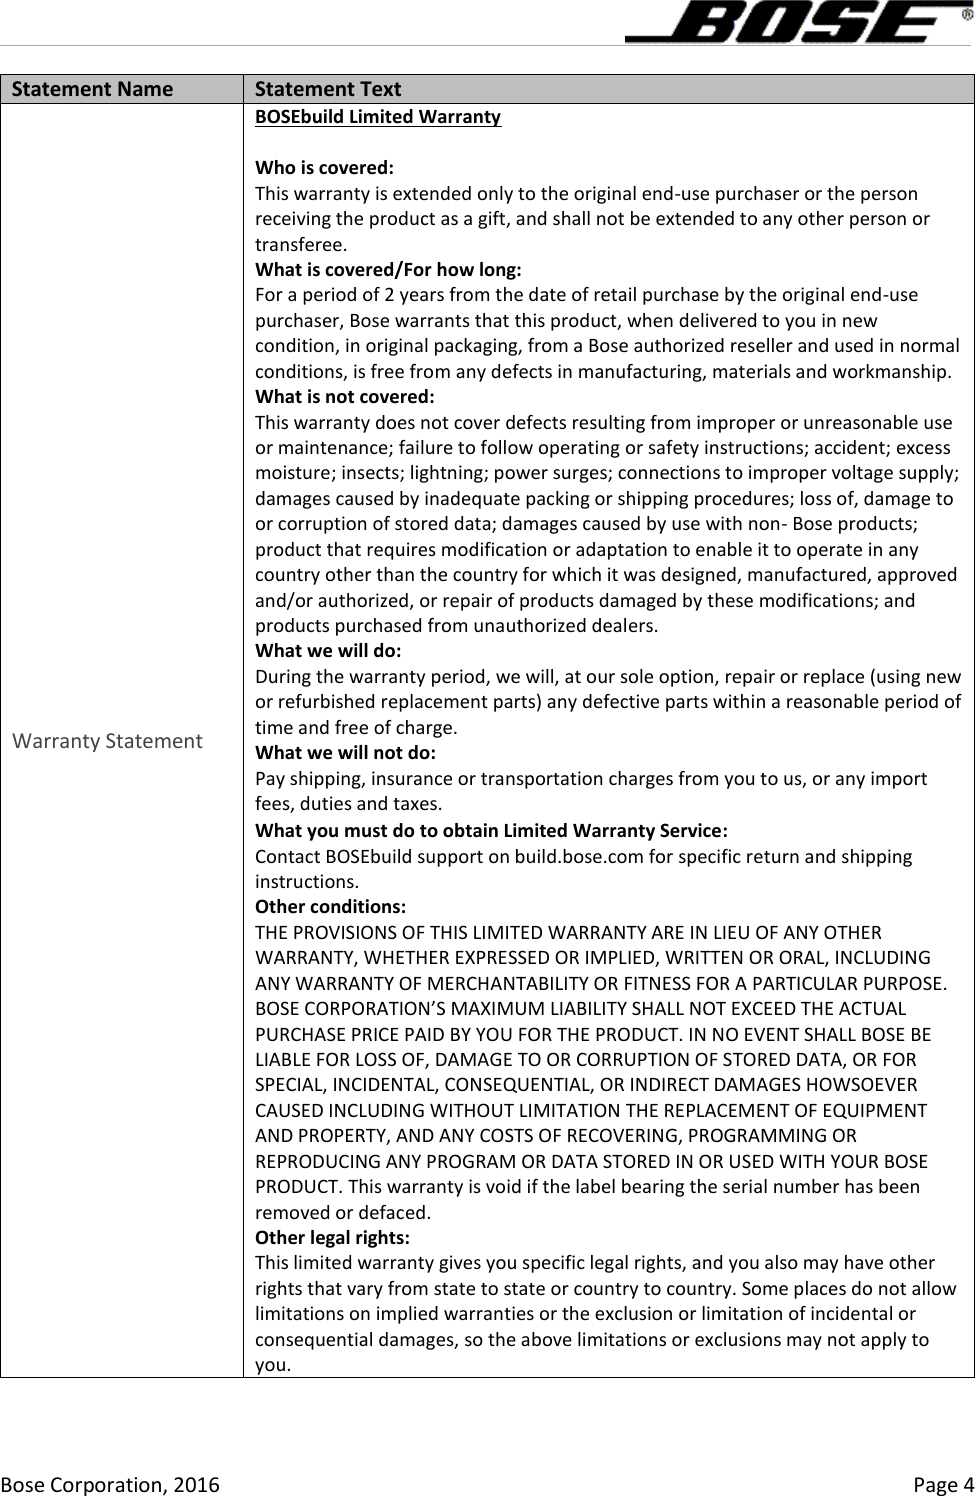      Bose Corporation, 2016    Page 4 Statement Name Statement Text Warranty Statement BOSEbuild Limited Warranty  Who is covered:  This warranty is extended only to the original end-use purchaser or the person receiving the product as a gift, and shall not be extended to any other person or transferee.  What is covered/For how long:  For a period of 2 years from the date of retail purchase by the original end-use purchaser, Bose warrants that this product, when delivered to you in new condition, in original packaging, from a Bose authorized reseller and used in normal conditions, is free from any defects in manufacturing, materials and workmanship.  What is not covered:  This warranty does not cover defects resulting from improper or unreasonable use or maintenance; failure to follow operating or safety instructions; accident; excess moisture; insects; lightning; power surges; connections to improper voltage supply; damages caused by inadequate packing or shipping procedures; loss of, damage to or corruption of stored data; damages caused by use with non- Bose products; product that requires modification or adaptation to enable it to operate in any country other than the country for which it was designed, manufactured, approved and/or authorized, or repair of products damaged by these modifications; and products purchased from unauthorized dealers.  What we will do:  During the warranty period, we will, at our sole option, repair or replace (using new or refurbished replacement parts) any defective parts within a reasonable period of time and free of charge.  What we will not do:  Pay shipping, insurance or transportation charges from you to us, or any import fees, duties and taxes.  What you must do to obtain Limited Warranty Service: Contact BOSEbuild support on build.bose.com for specific return and shipping instructions.    Other conditions:  THE PROVISIONS OF THIS LIMITED WARRANTY ARE IN LIEU OF ANY OTHER WARRANTY, WHETHER EXPRESSED OR IMPLIED, WRITTEN OR ORAL, INCLUDING ANY WARRANTY OF MERCHANTABILITY OR FITNESS FOR A PARTICULAR PURPOSE. BOSE CORPORATION’S MAXIMUM LIABILITY SHALL NOT EXCEED THE ACTUAL PURCHASE PRICE PAID BY YOU FOR THE PRODUCT. IN NO EVENT SHALL BOSE BE LIABLE FOR LOSS OF, DAMAGE TO OR CORRUPTION OF STORED DATA, OR FOR SPECIAL, INCIDENTAL, CONSEQUENTIAL, OR INDIRECT DAMAGES HOWSOEVER CAUSED INCLUDING WITHOUT LIMITATION THE REPLACEMENT OF EQUIPMENT AND PROPERTY, AND ANY COSTS OF RECOVERING, PROGRAMMING OR REPRODUCING ANY PROGRAM OR DATA STORED IN OR USED WITH YOUR BOSE PRODUCT. This warranty is void if the label bearing the serial number has been removed or defaced.  Other legal rights:  This limited warranty gives you specific legal rights, and you also may have other rights that vary from state to state or country to country. Some places do not allow limitations on implied warranties or the exclusion or limitation of incidental or consequential damages, so the above limitations or exclusions may not apply to you.   